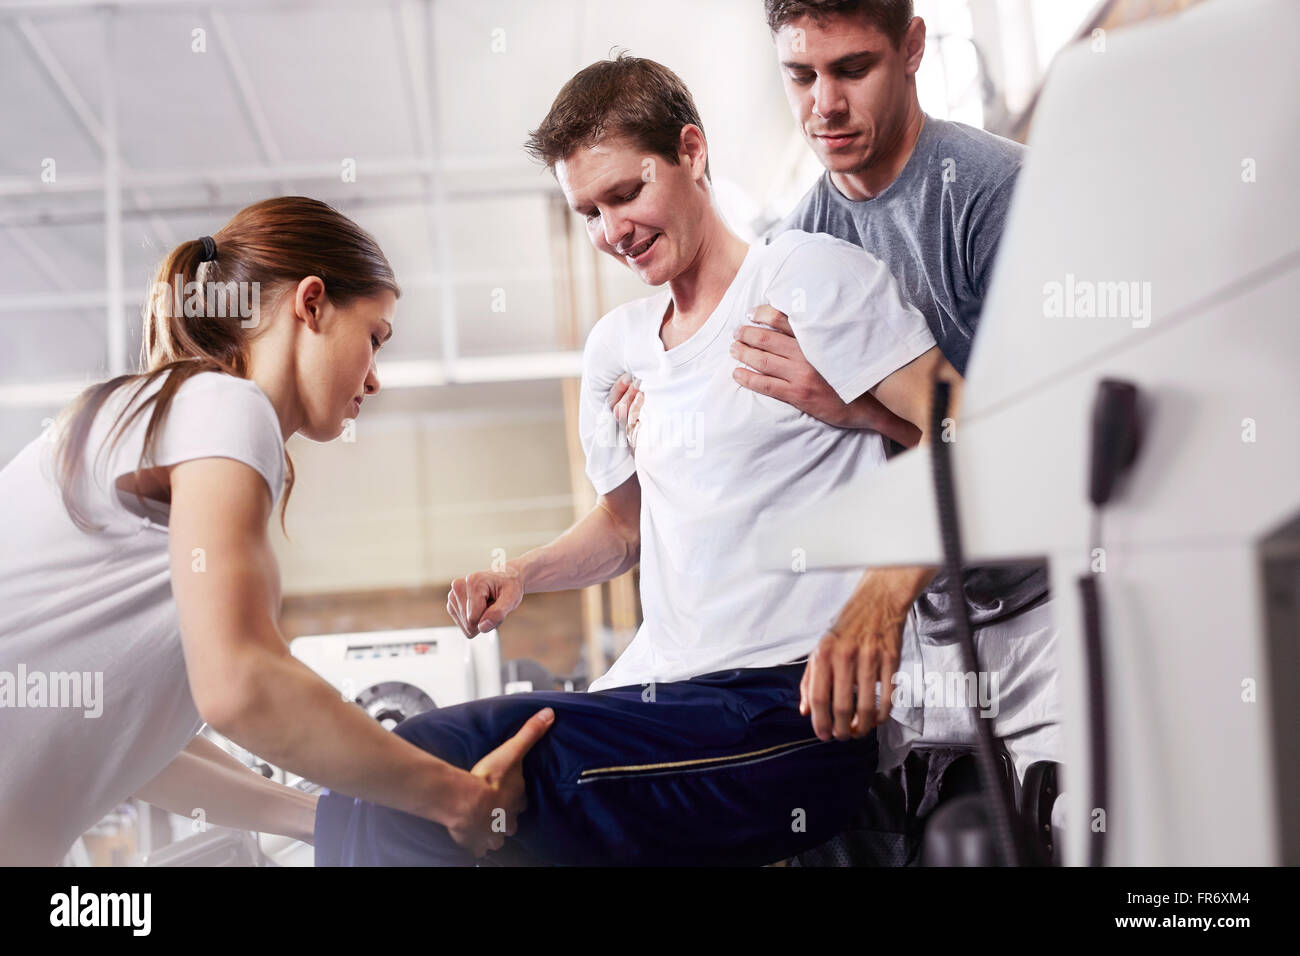 Physical therapists lifting man Stock Photo